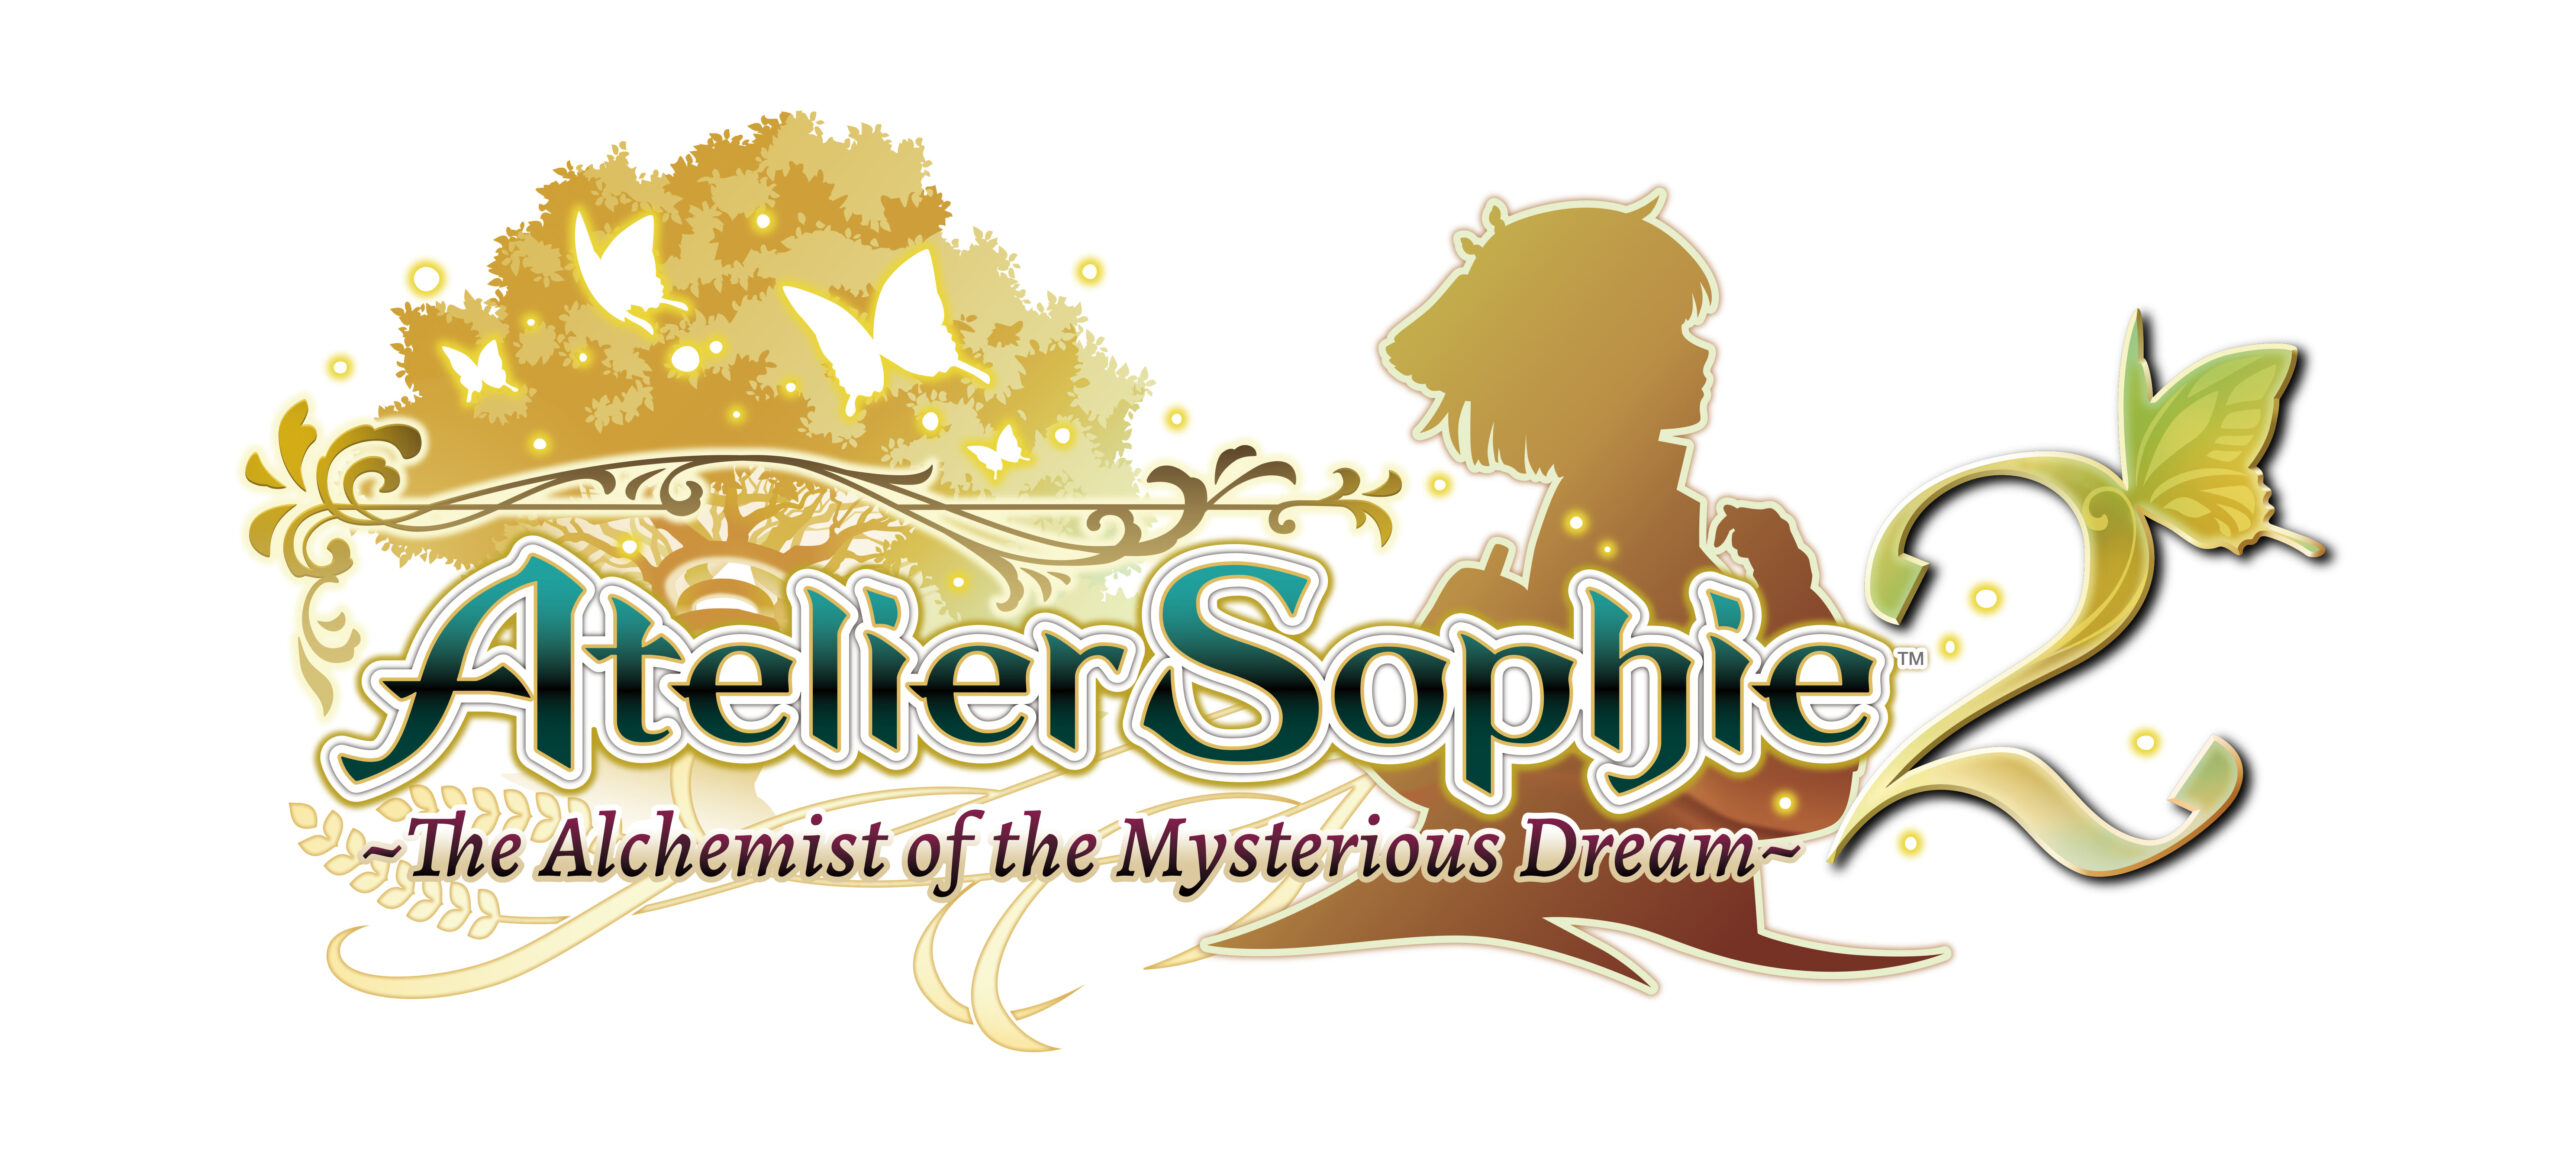 Meet the Creator of Erde Wiege in Atelier Sophie 2: The Alchemist of the Mysterious Dream